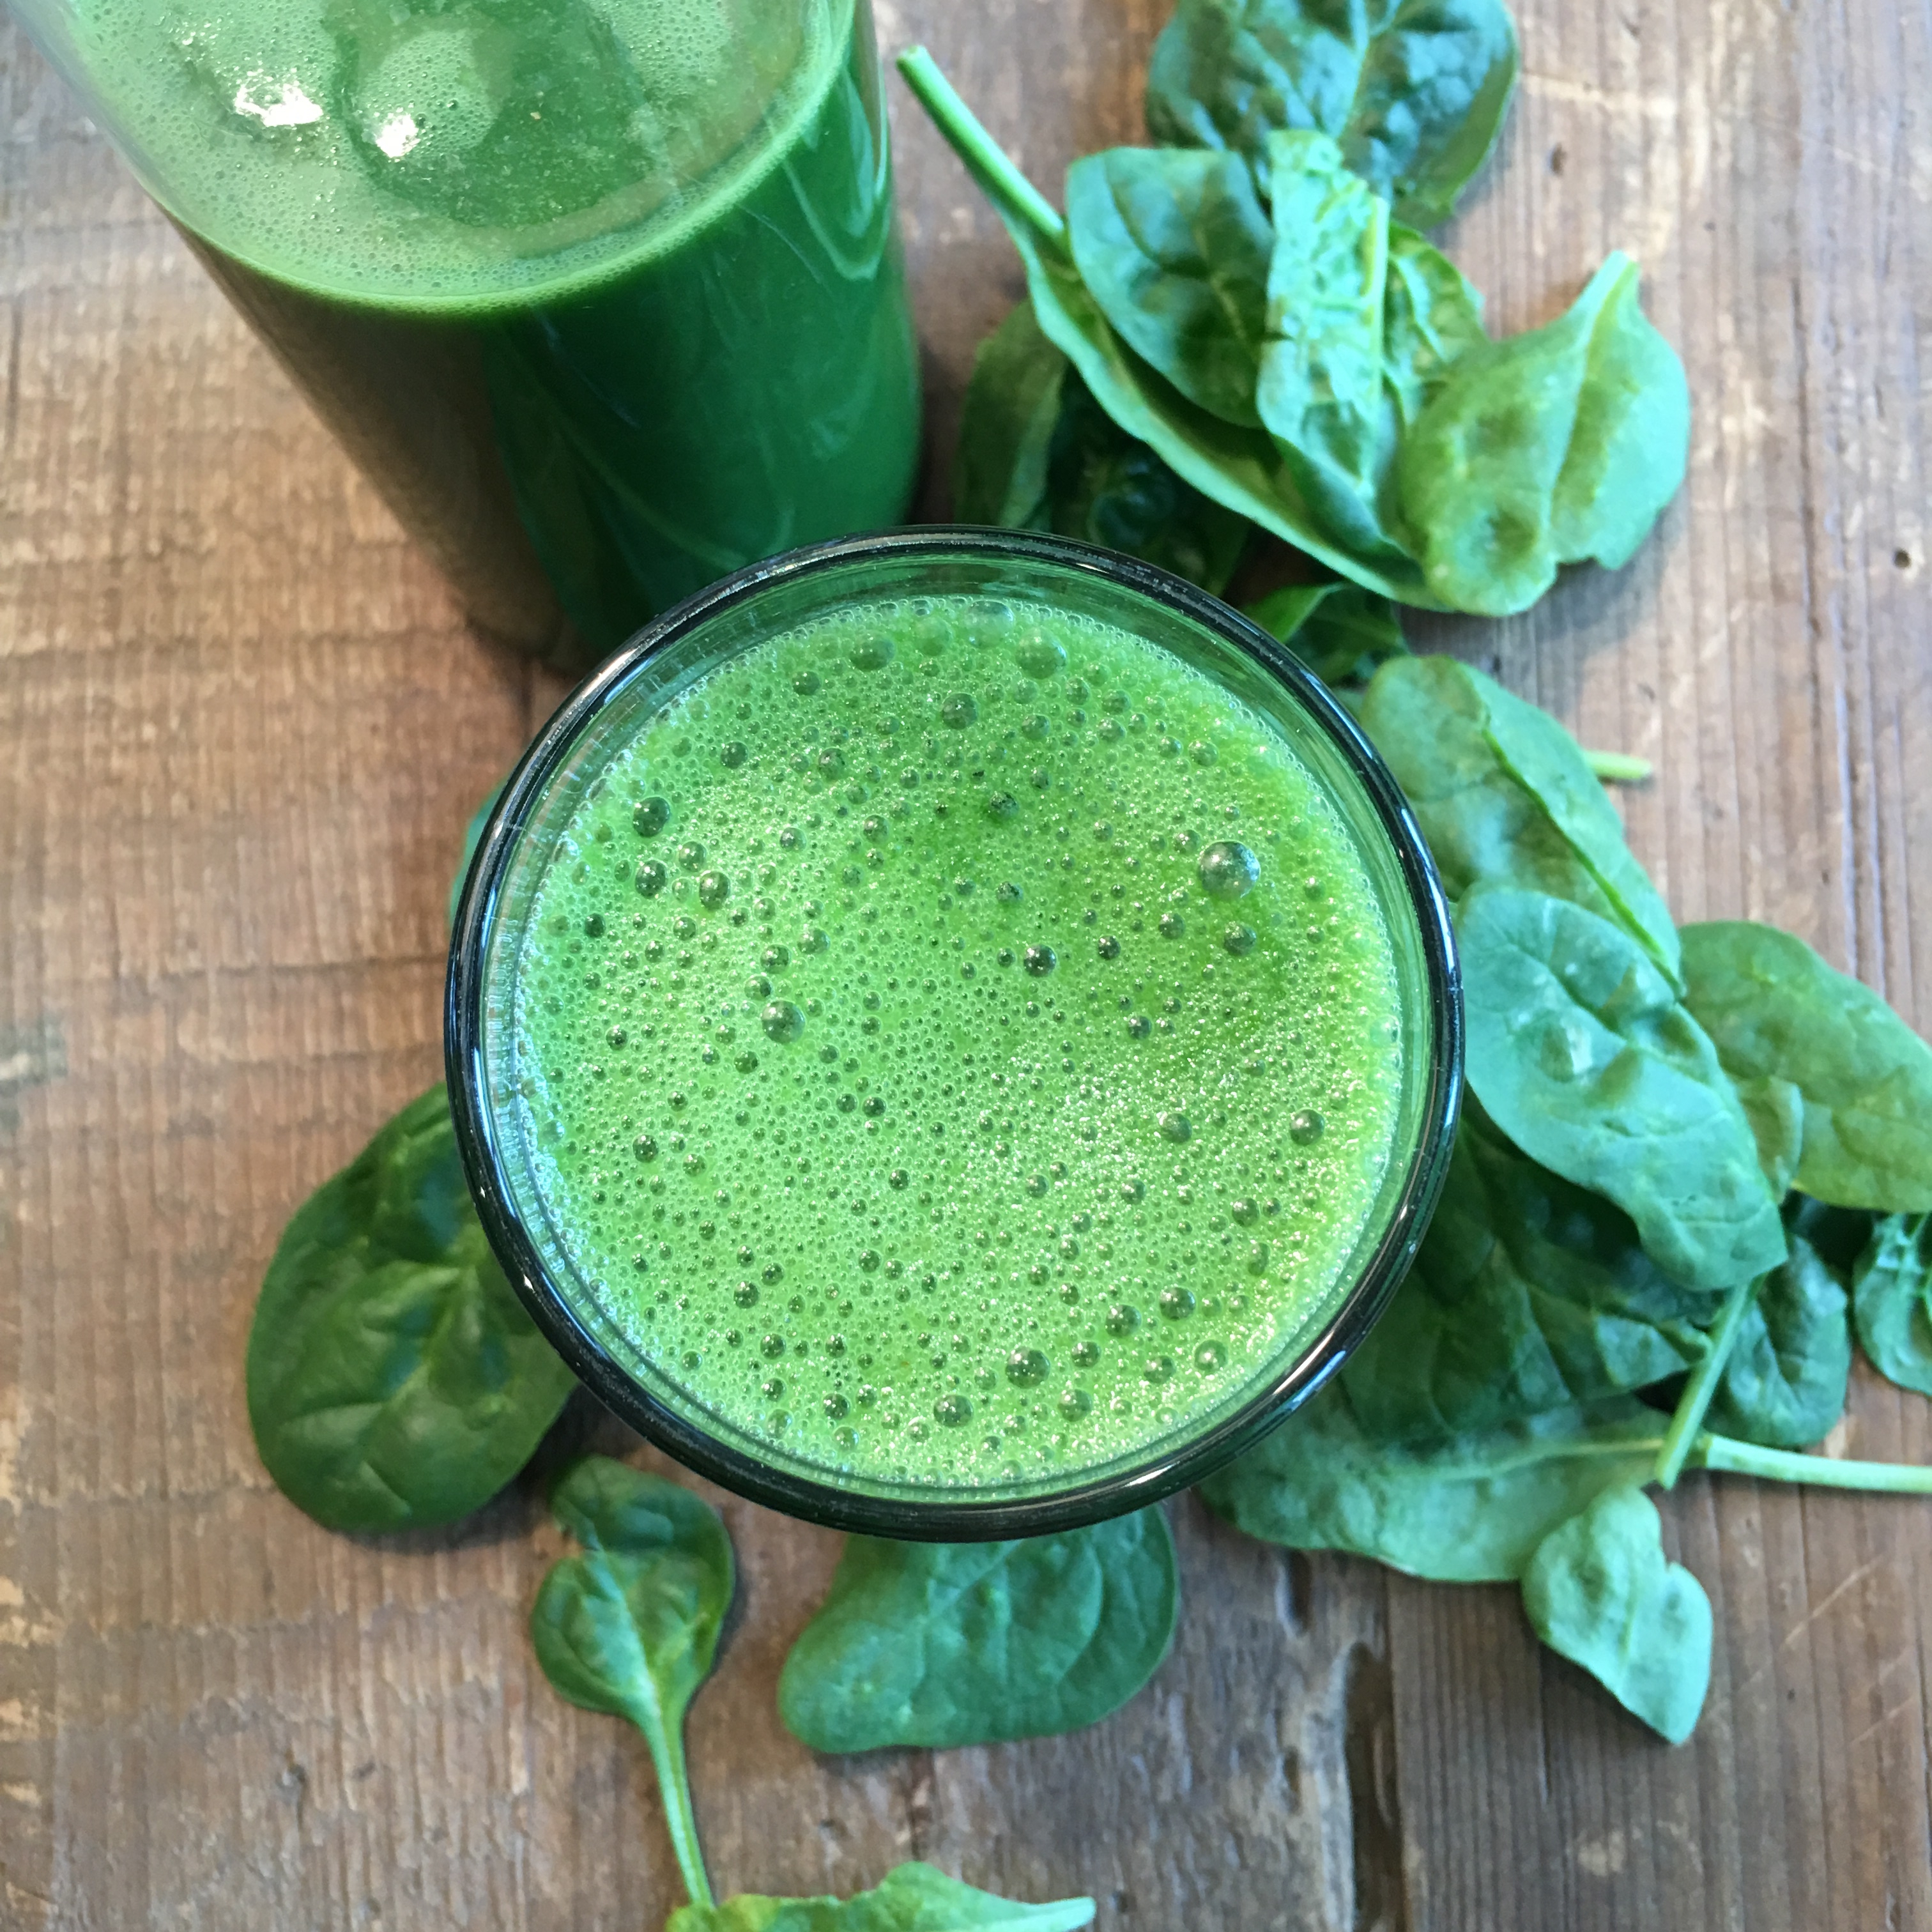 Turns out, Mom was right. But, you already knew that eating green vegetables seriously improves your health. The more I study nutrition, the more I realize that no matter how many green veggies you eat, you still probably aren’t getting enough. So don’t just eat your greens…DRINK your greens in the form of this healthy smoothie! Life gets hectic so it’s not always easy to eat healthy. The key is organization and planning. At the beginning of each week I buy and wash a bunch of smoothie ingredients so they are ready to go. That way, it’s faster to throw them in the blender when you are rushing out the door. OR, if you know your morning is tight, put the majority of fruits and veggies in the container the night before so the next morning all you have to do is add your liquid and ice cubes and press ‘start’. Voila, done in about three minutes! I like to make enough for two servings. I drink one at breakfast and save one for a mid-morning snack. A healthy smoothie is THE simplest way to start your day on the right foot and it makes sticking with a clean eating plan SO much easier. I want to provide my body with great nutrients and my gut with enough fibre so my whole digestive system will work optimally. You can play with lots of different green combinations. I’ve done a fair bit of experimenting and I find these core ingredients work well together: Celery: Rich in vitamin K, A and C and also contains folate and potassium. It mainly consists of water, but it’s a great source of dietary fibre which is SO important. Spinach: A source of magnesium, folate, vitamins B2, B6, A and K. Spinach (along with parsley, kale and chard) has anti-oxidant and anti-cancer properties and improves your eyesight, skin and hair. Ginger: Helps with digestion and inflammation. Lemon: Not just a great source of vitamin C, B6, A and E but it is THE key to making your greens more palatable and gives it a thinner consistency. Although lemon is very acidic in taste, when the juice has been fully metabolized, its effect is said to be alkalizing. That’s great since so much of what we North Americans eat is very acidic. 